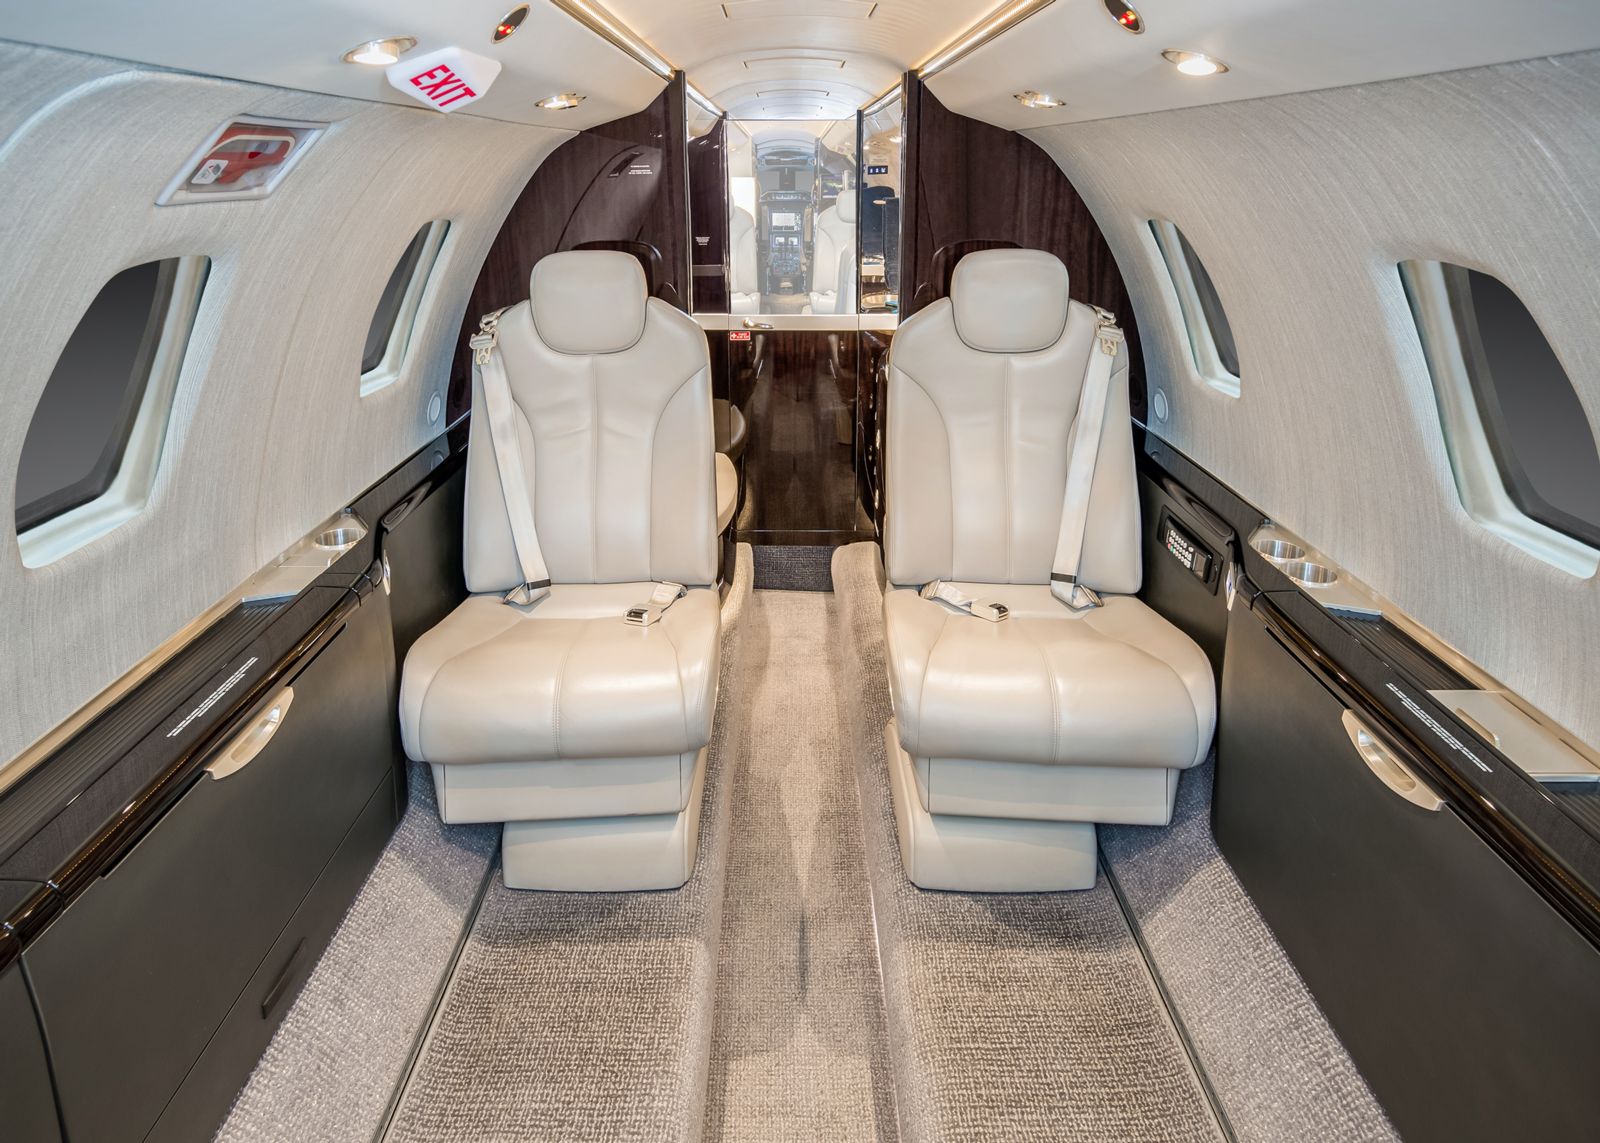 Cessna/Textron Citation X+  S/N 525 for sale | gallery image: /userfiles/images/Citation_X_Plus_sn525/aft%20aft.jpg